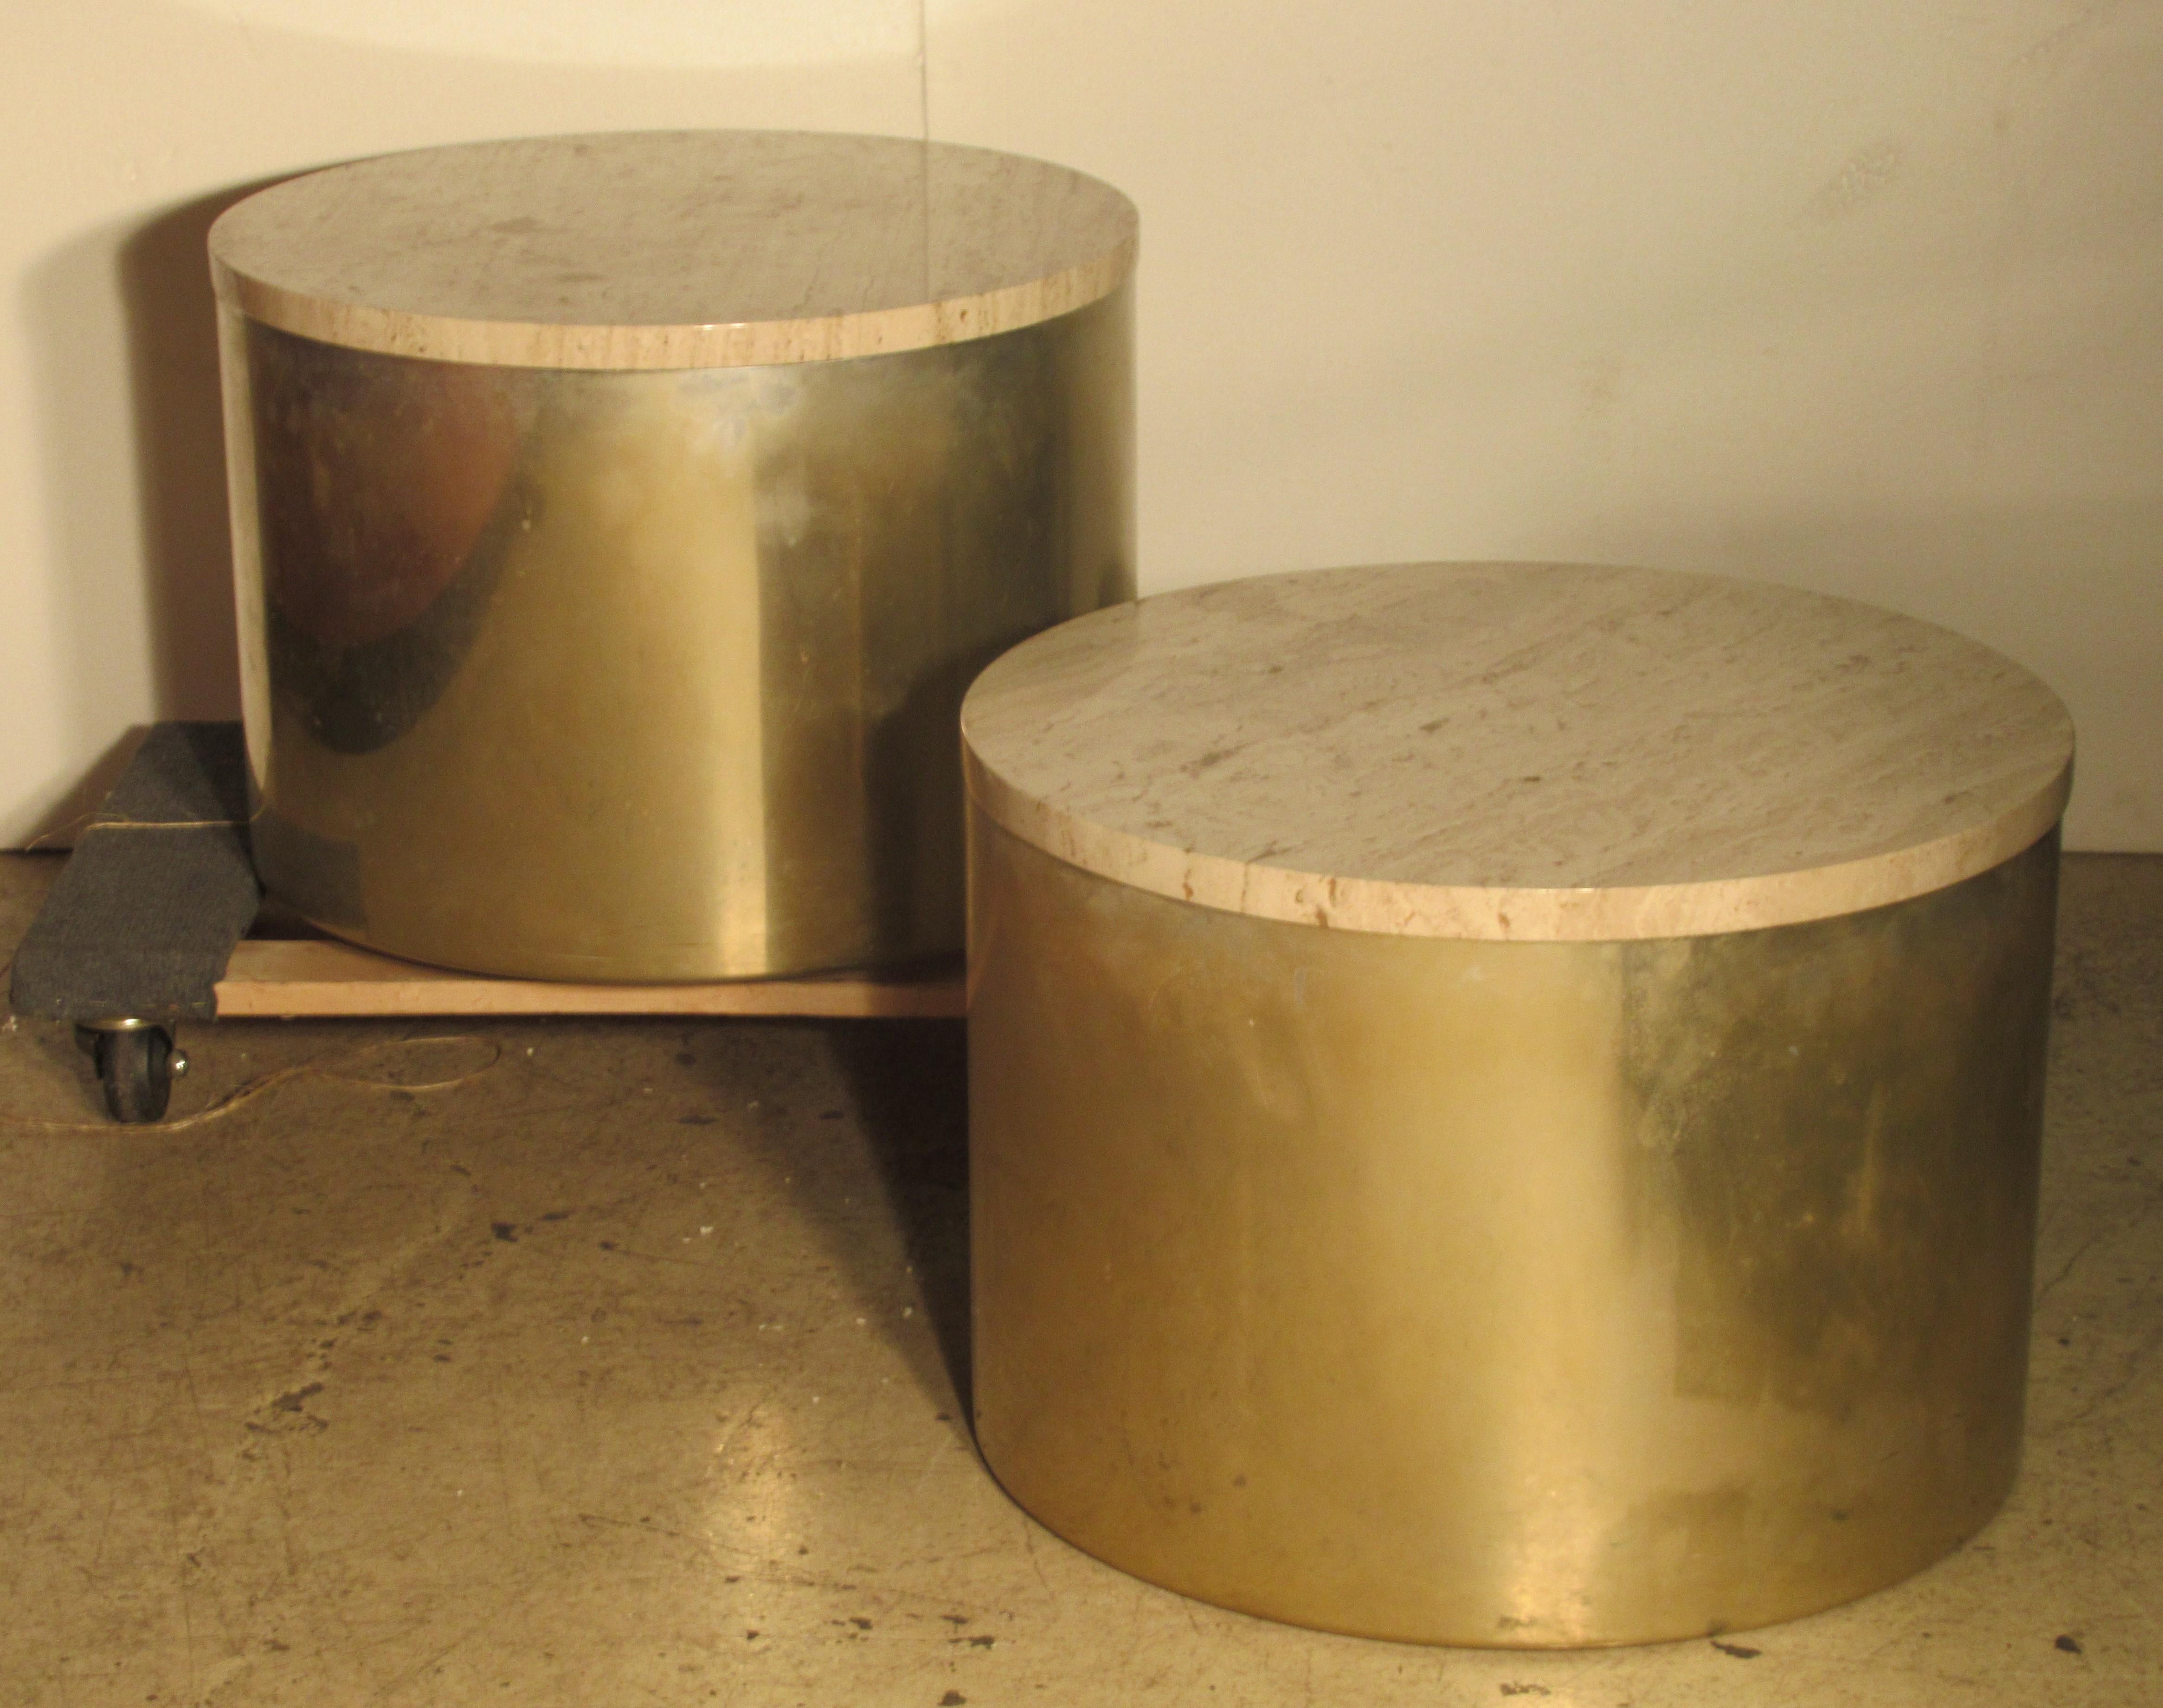 A matched pair of 1970s Minimalist designed aluminum cylinder drum tables with brass finish and removable inset travertine tops by Paul Mayen for Habitat International ( label on bottom reads Architectural Supplements - Habitat - Habitat